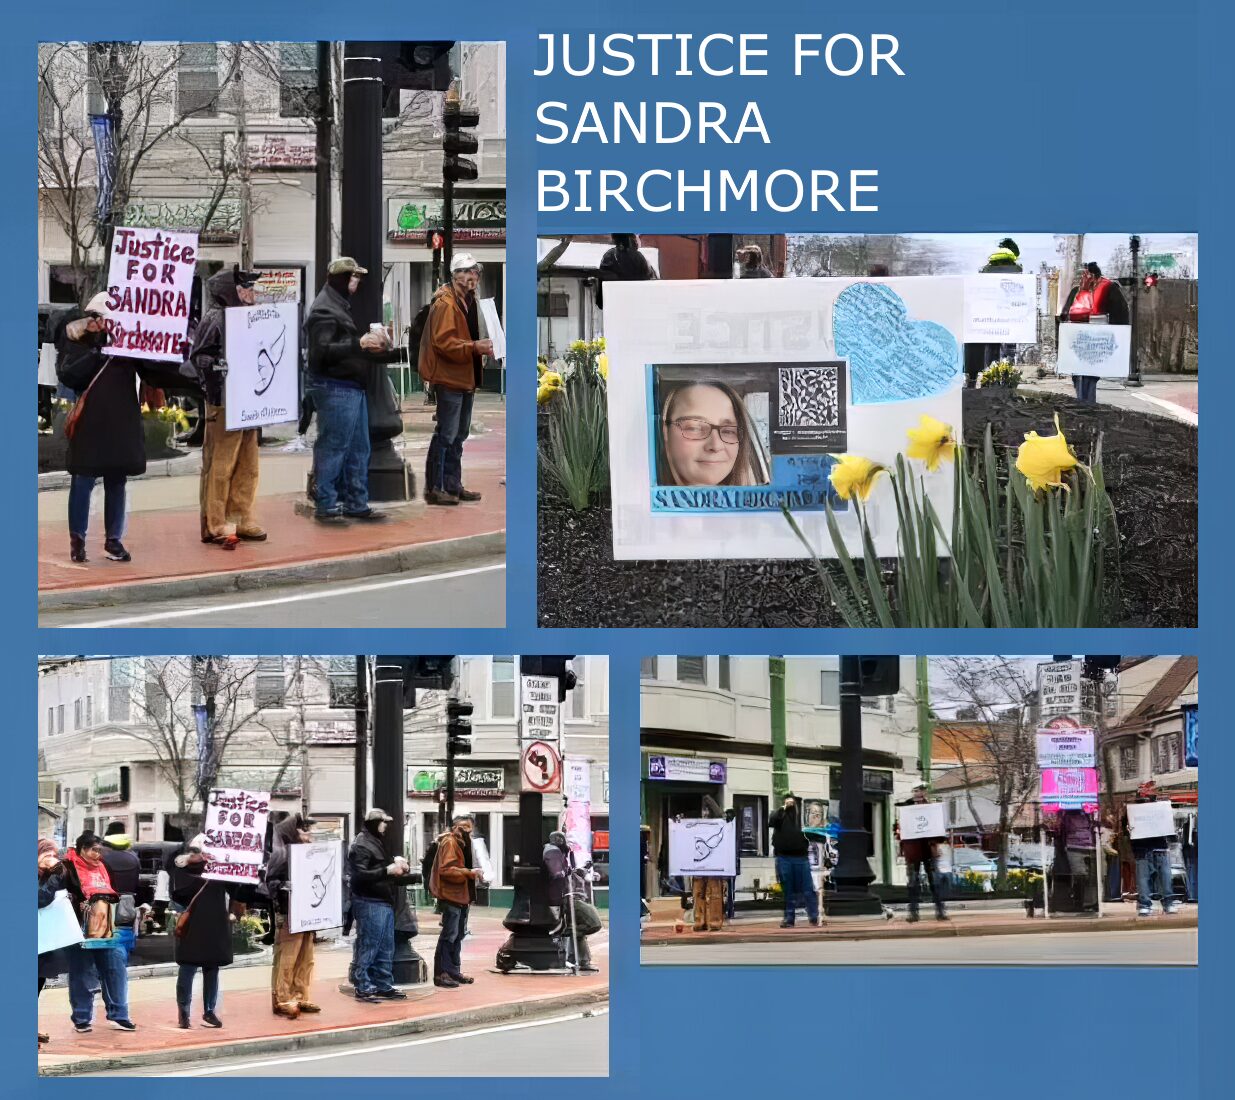 Sandra Birchmore justice: Collage of photos of several people with signs stand outside on brick sidewalk in winter clothes